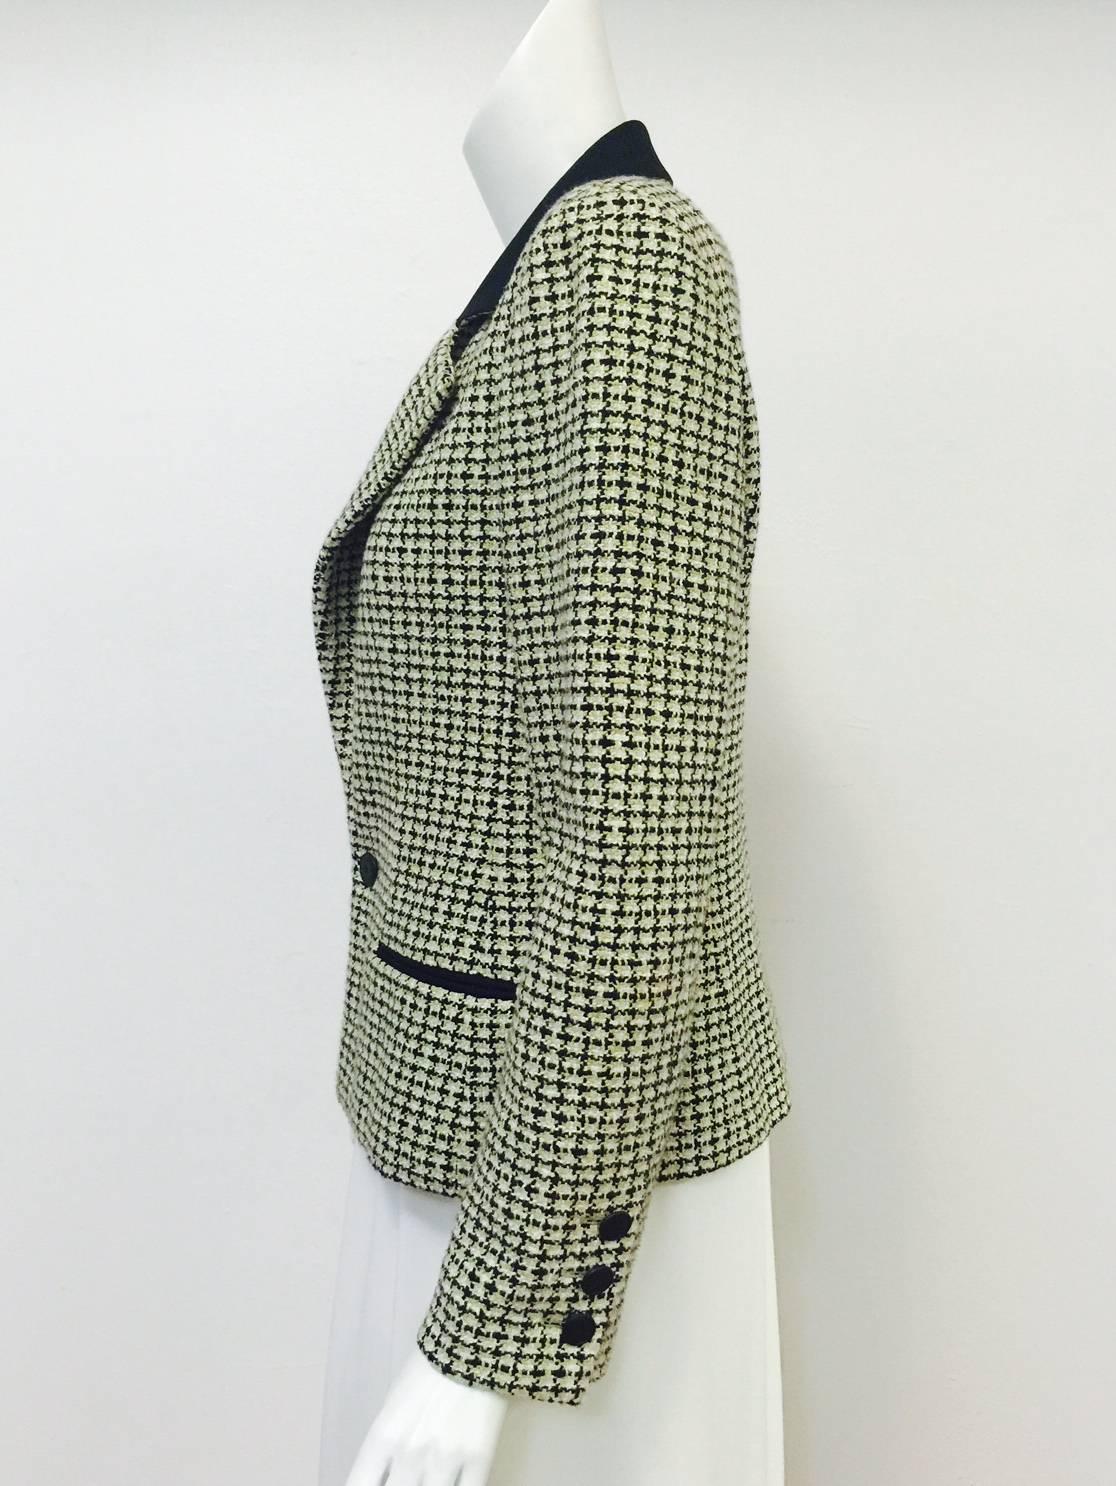 Chanel Spring 2002 Houndstooth Cotton Tweed Jacket With Incorporated Vest In Excellent Condition For Sale In Palm Beach, FL